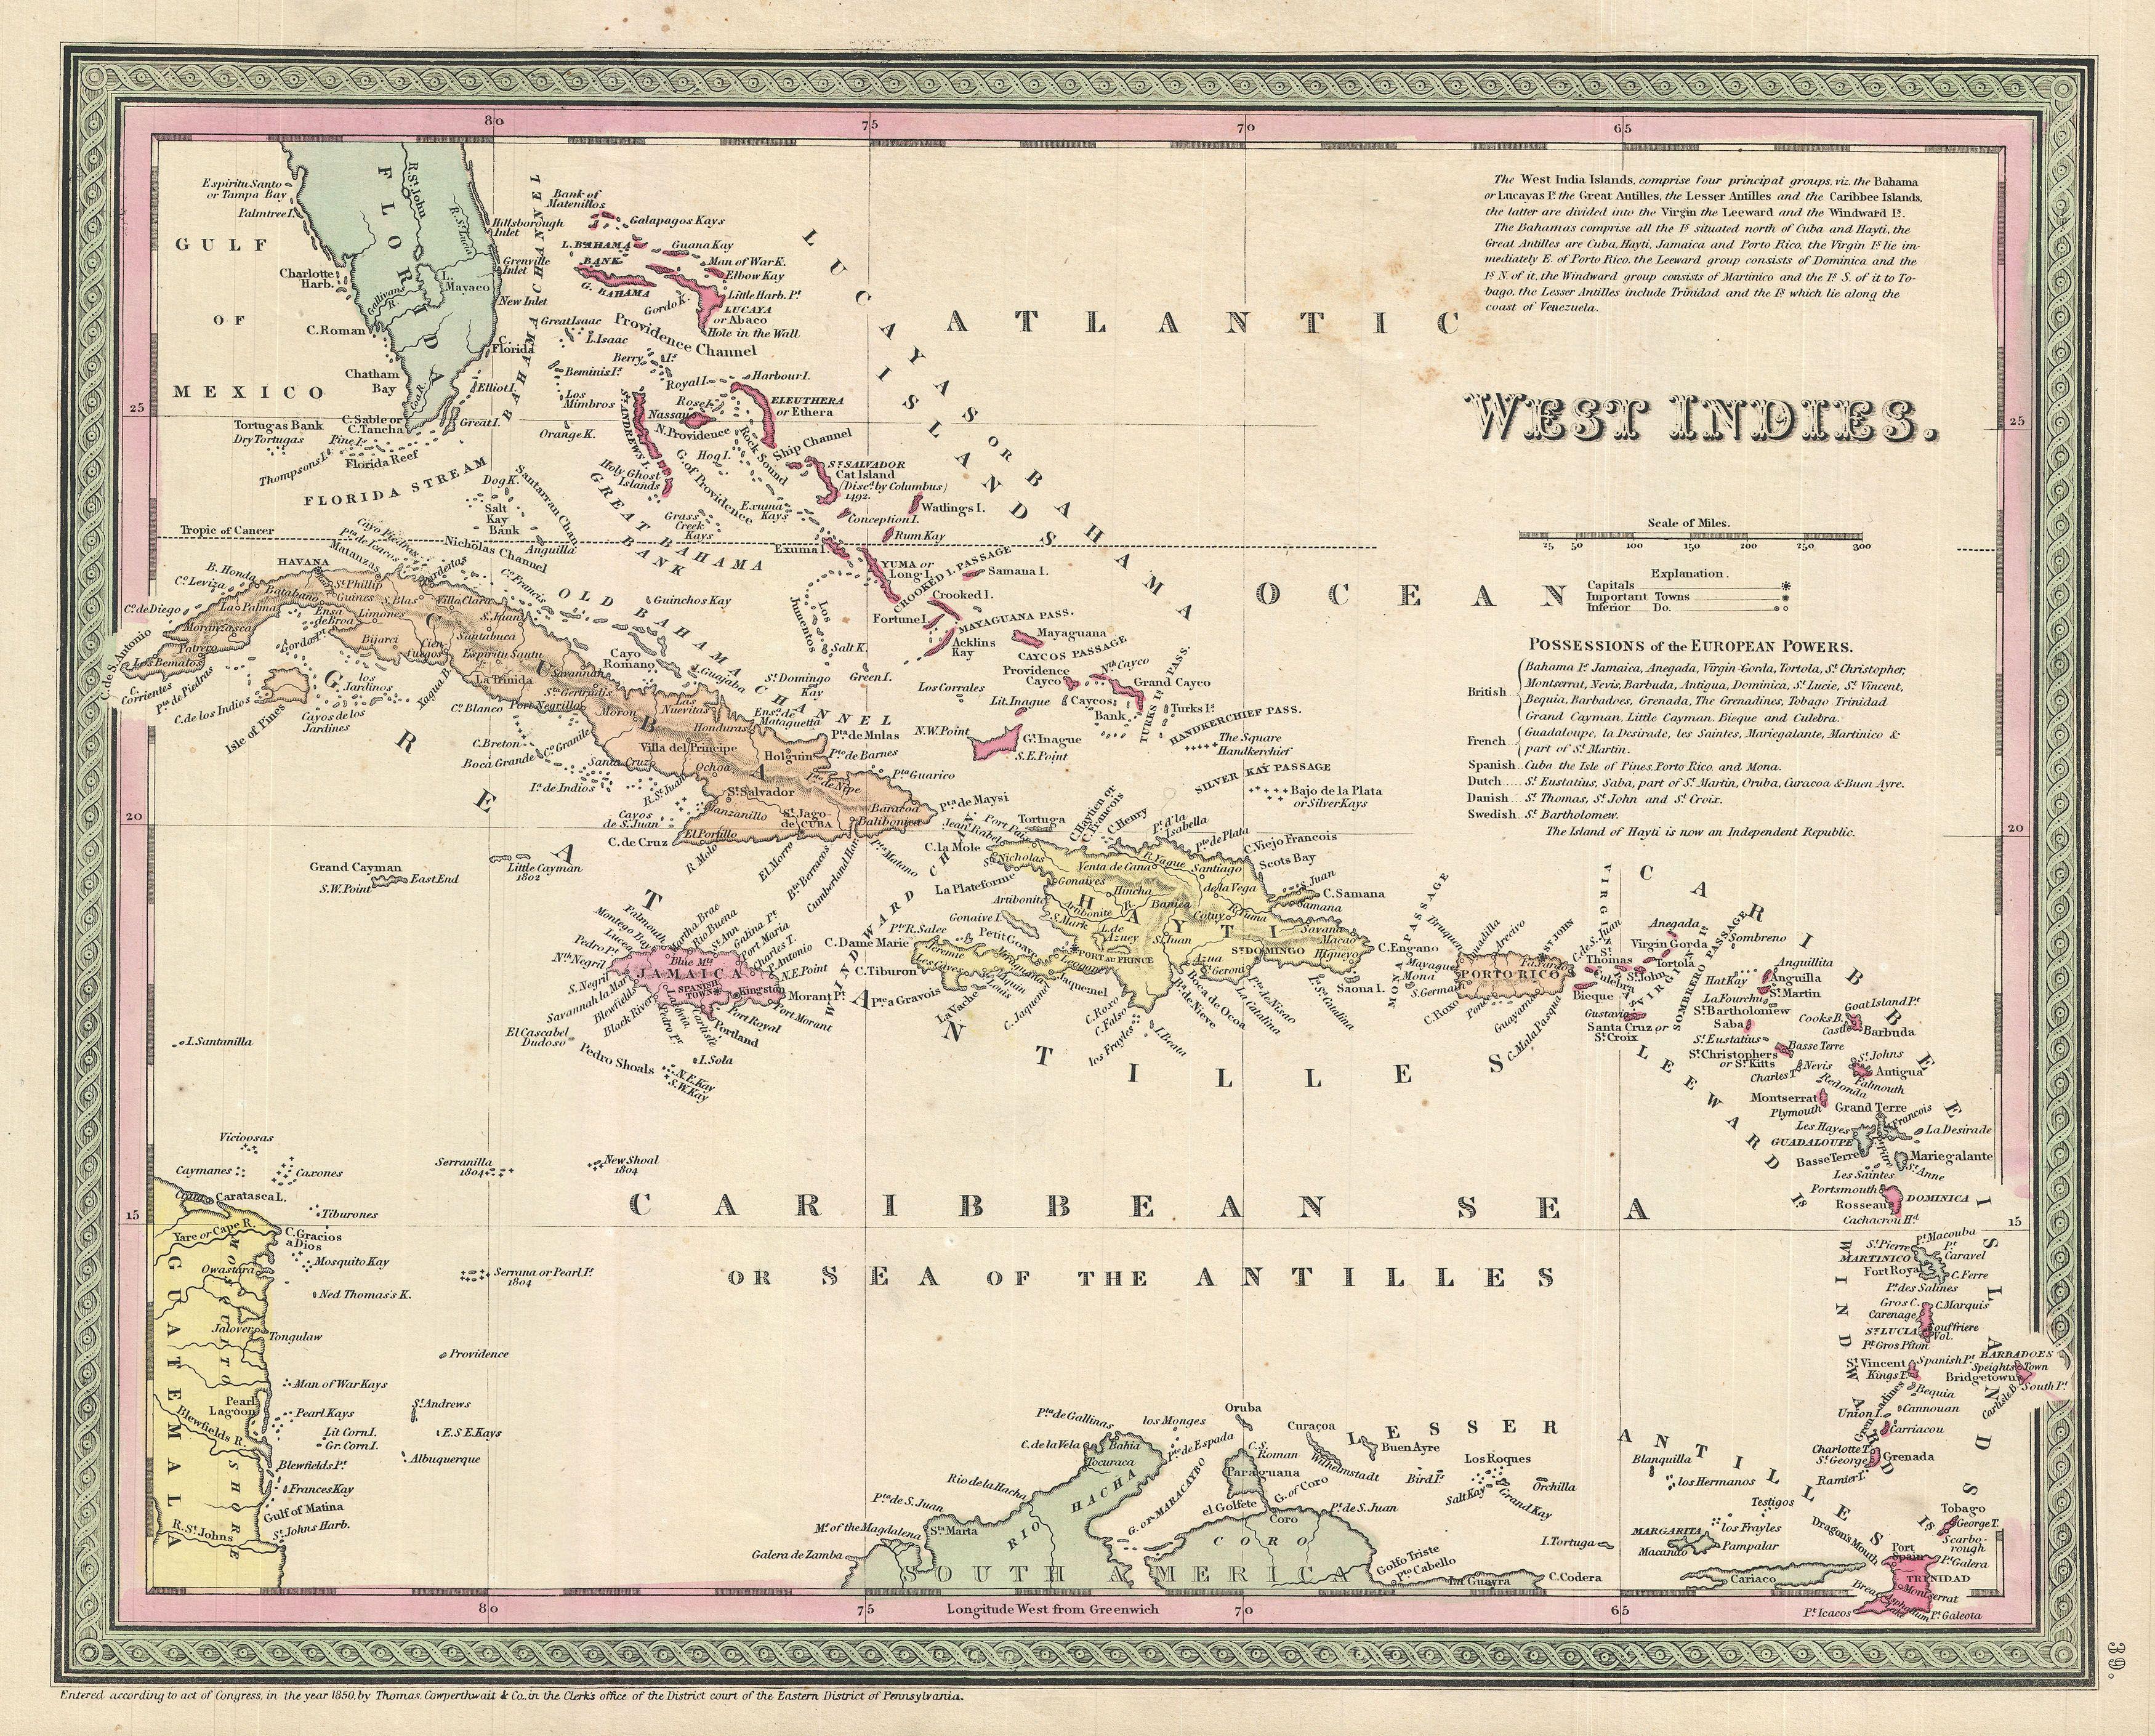 1850 Cowperthwait Map of Cuba and West Indies - Geographicus - WestIndies-m-1850